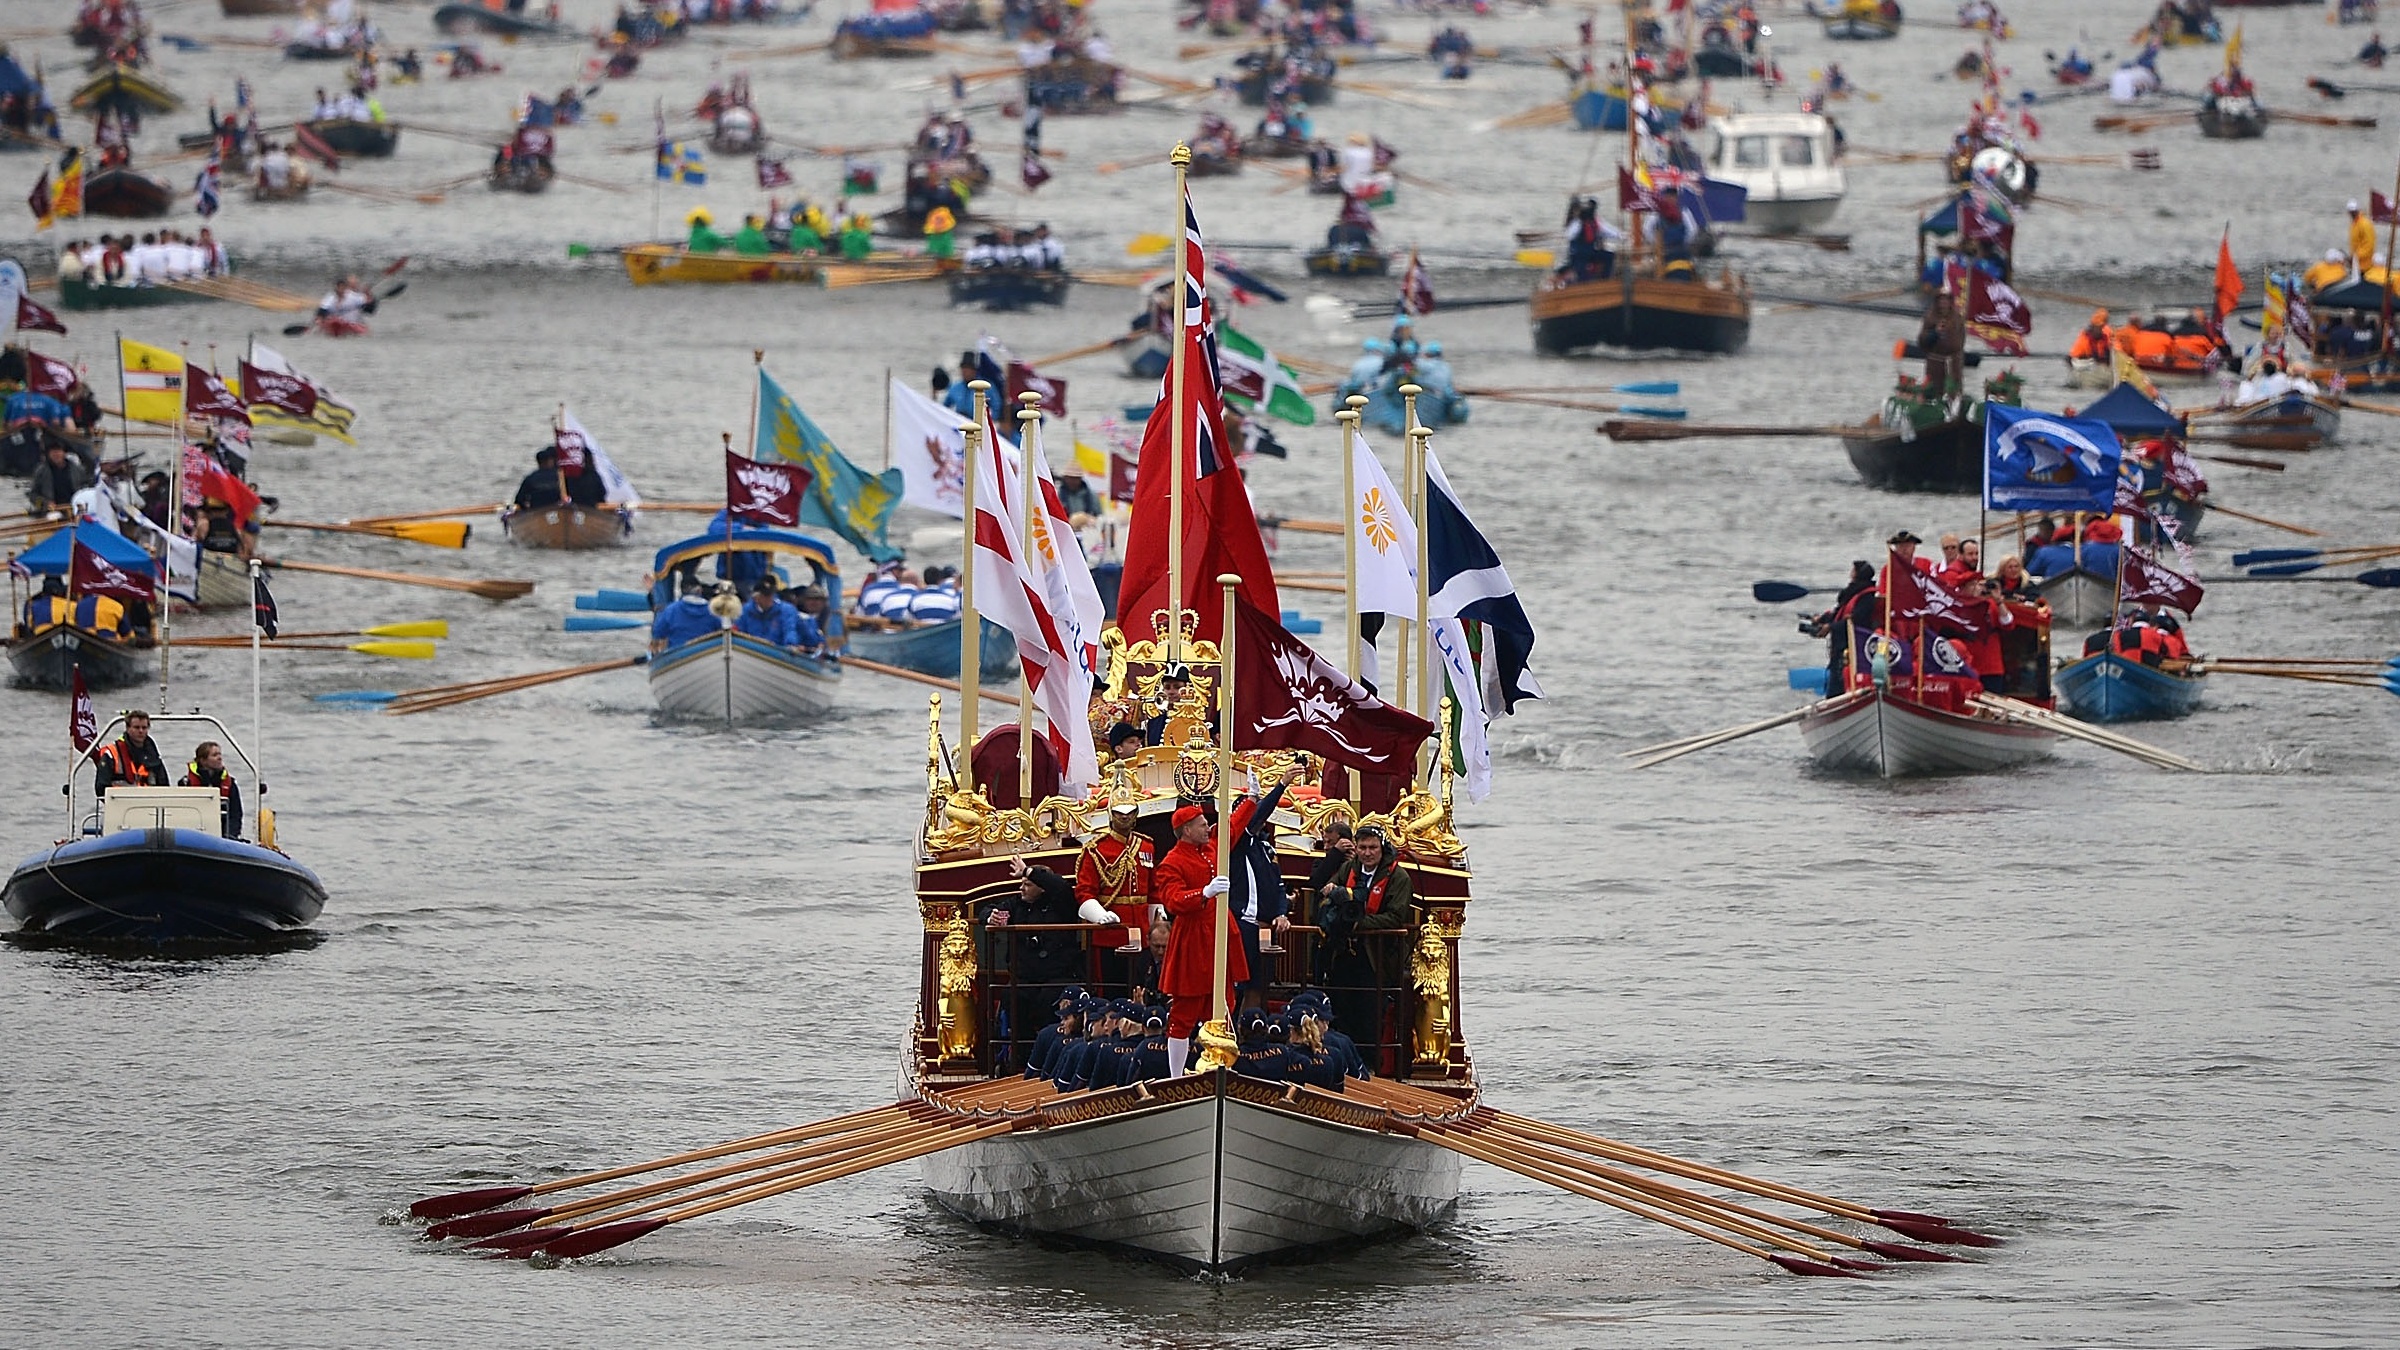 The Queen, along with all members of the royal family, participatec in a River Pageant with a flotilla of a 1,000 boats accompanying them down the Thames as part of the Diamond Jubilee celebrations